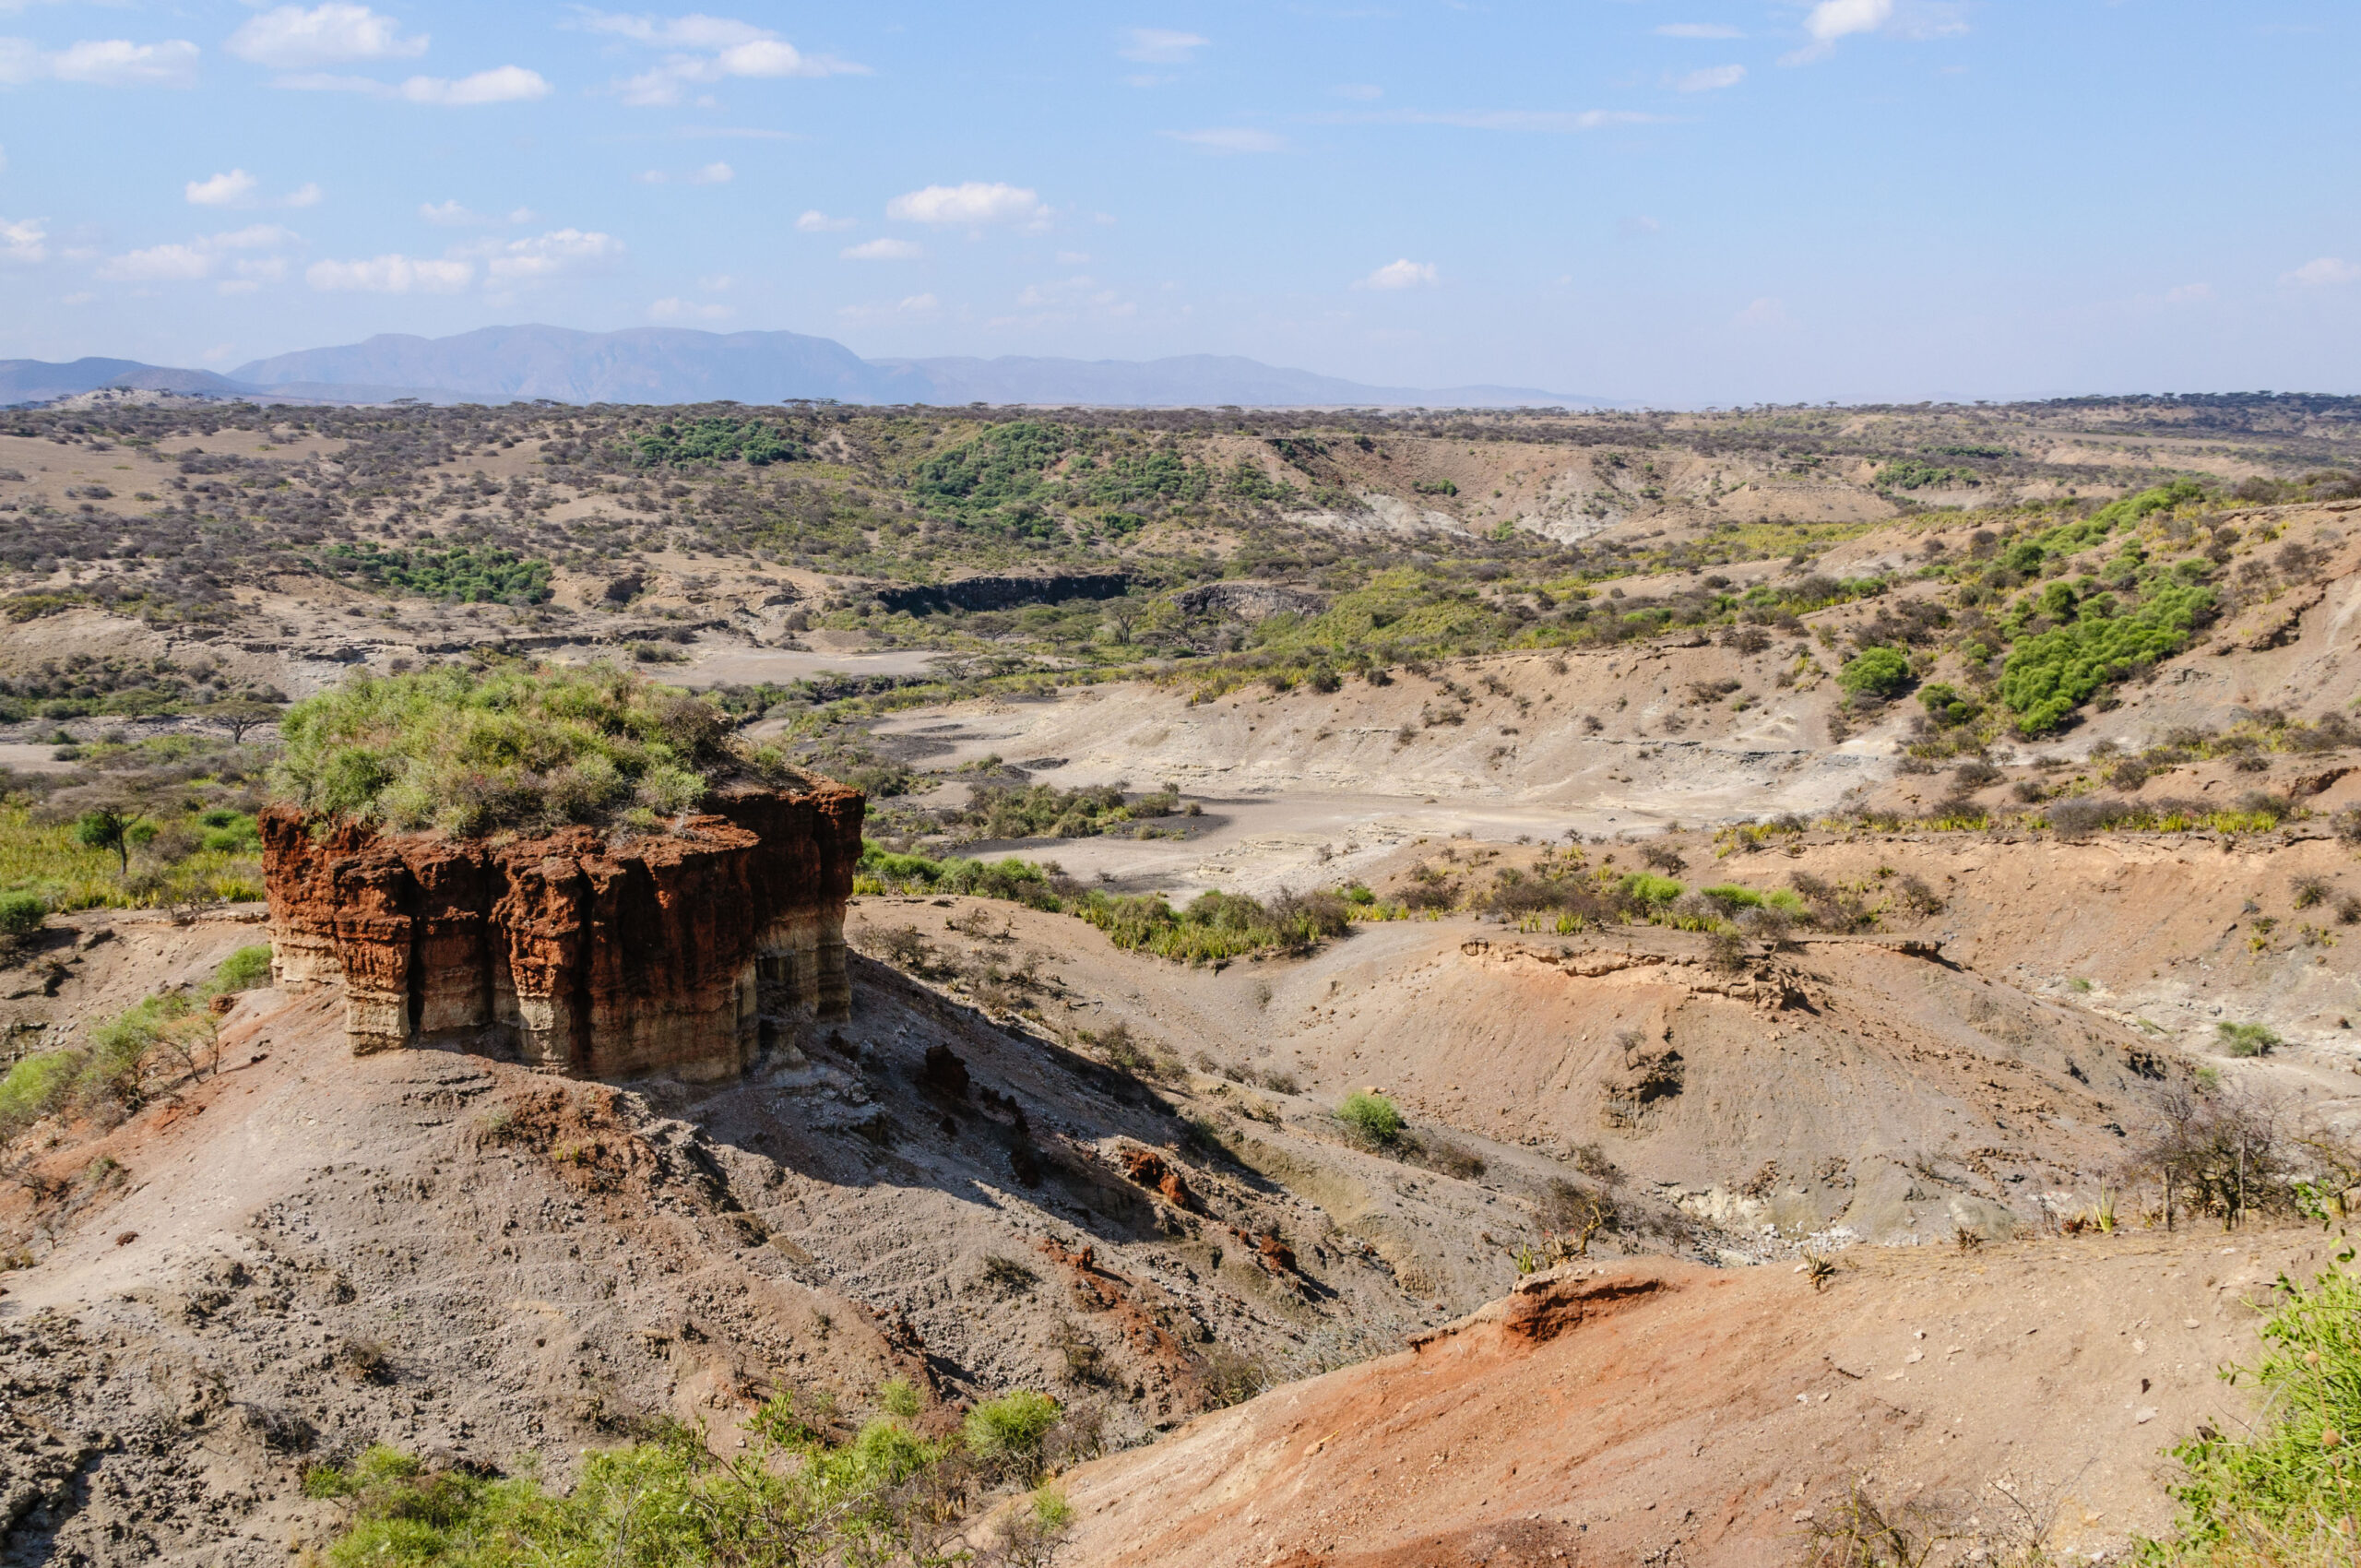 Olduvai Gorge, where many early human fossils were found